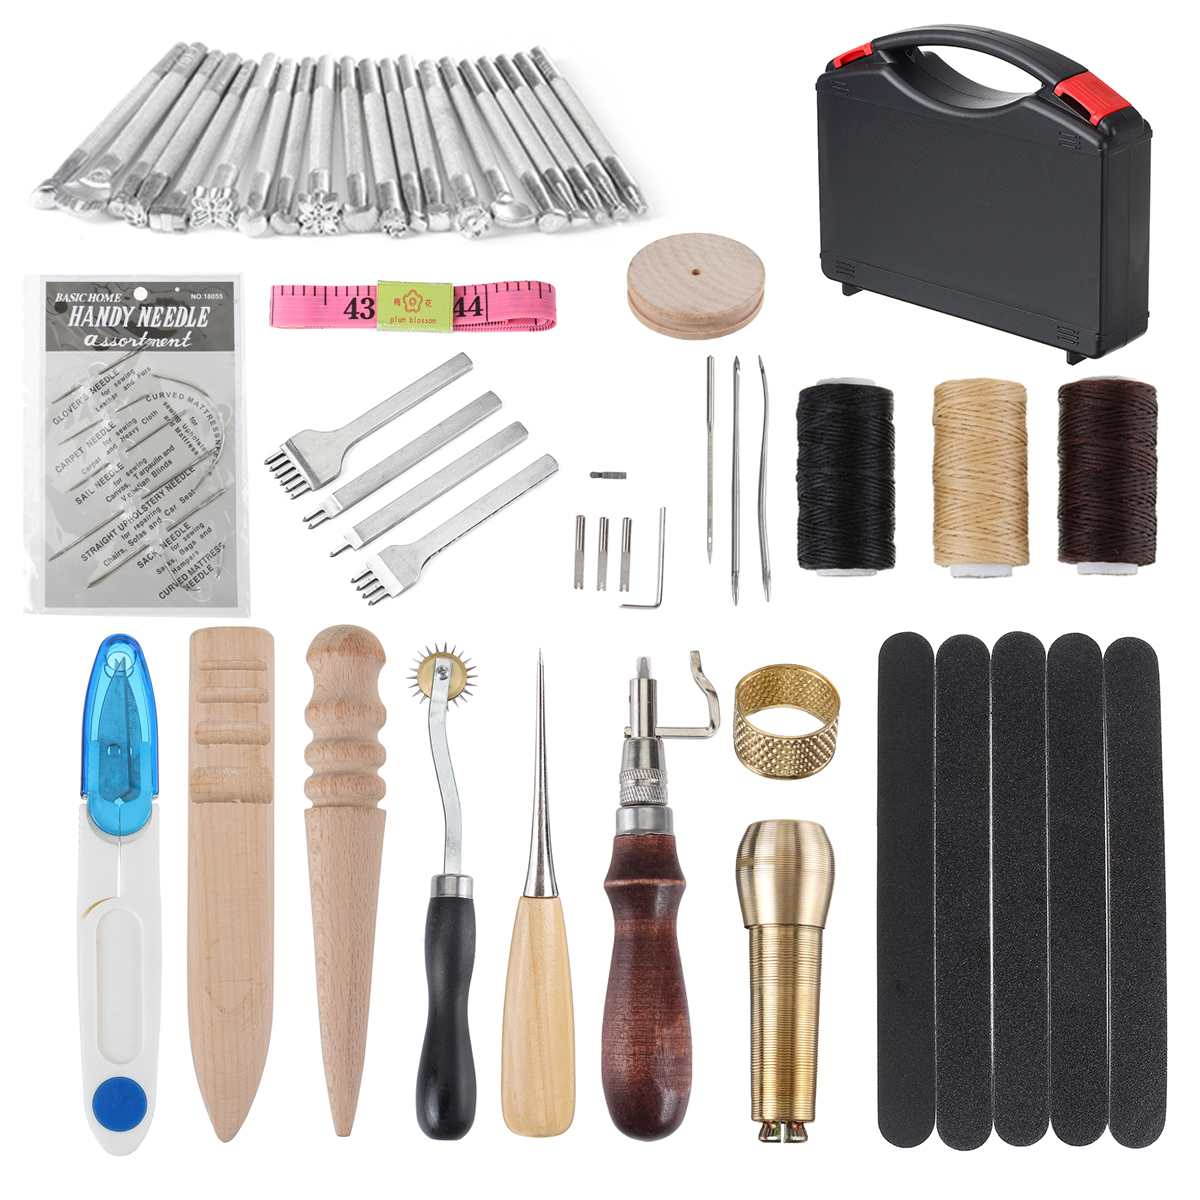 20/50/59/60 Pcs Professional Leather Craft Hand Tools Kit Hand Sewing Stitching Punch Carving Work Leathercraft Accessories